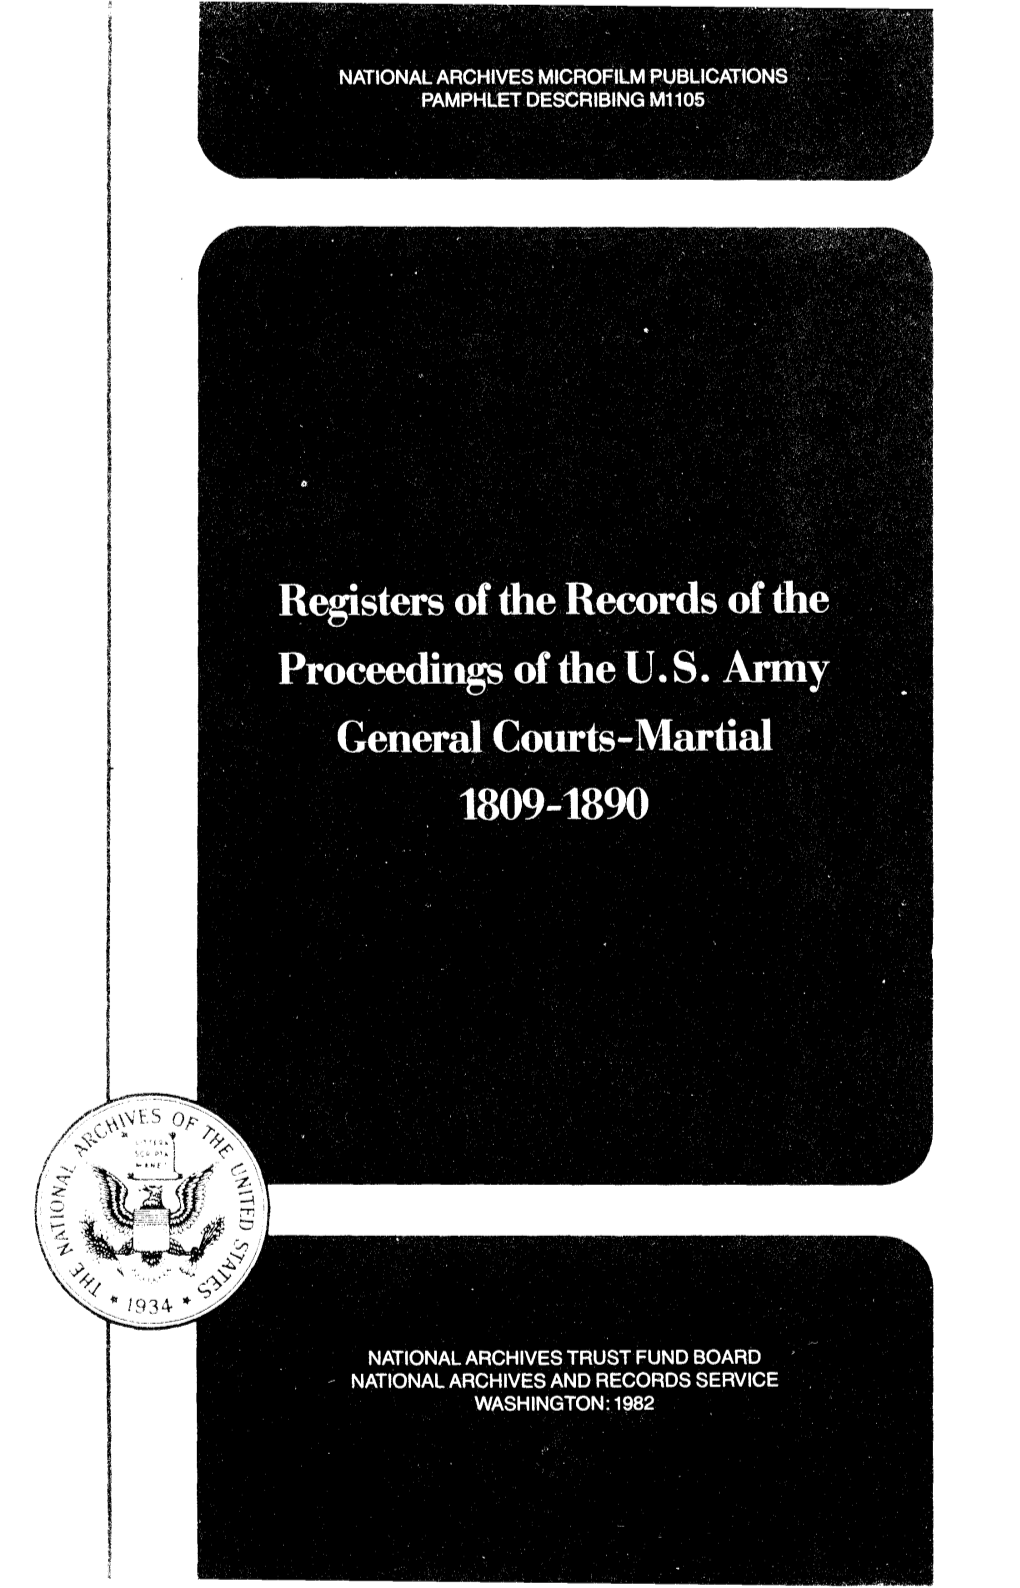 Registers of the Records of the Proceedings of the U.S. Army General Courts-Martial 1809-1890